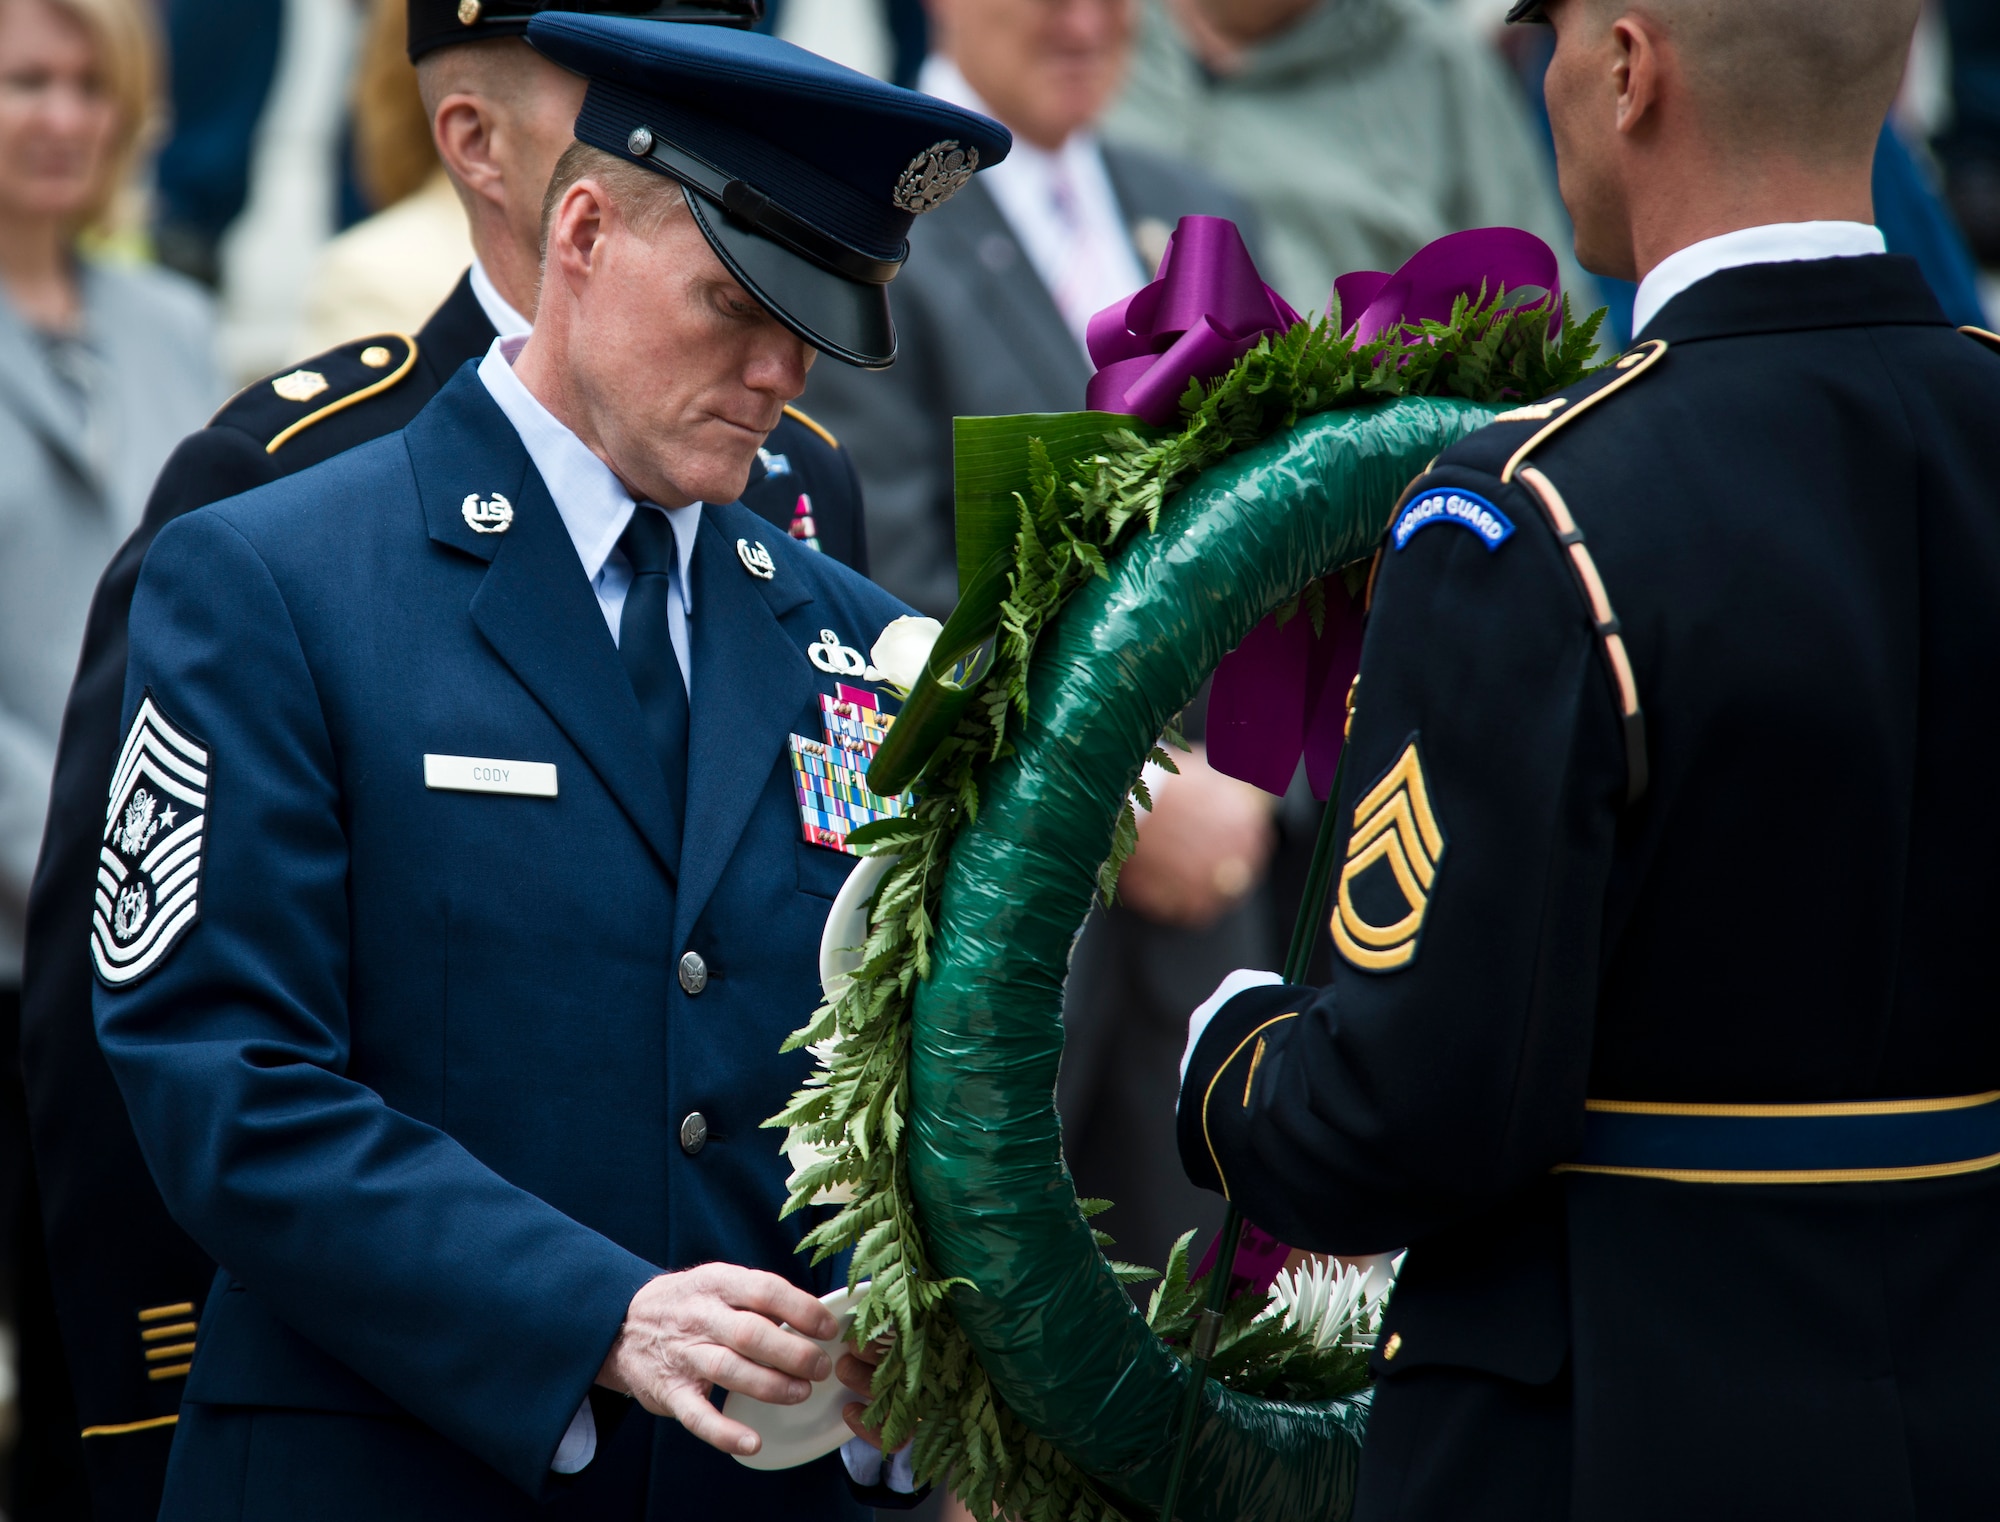 Chief Master Sgt. of the Air Force James A. Cody places a service crest on a wreath in honor of Airmen’s sacrifices during the inaugural Armed Forces Day wreath-laying ceremony May 18, 2013, at the Tomb of the Unknown Soldier at Arlington National Cemetery, Va. Cody along with the senior enlisted advisers from the Army, Navy, Marine Corps,and Coast Guard hung logos of their service on a wreath wrapped with purple ribbon just steps away from the gravesite. (U.S. Air Force photo/Senior Airman Andrew Lee)